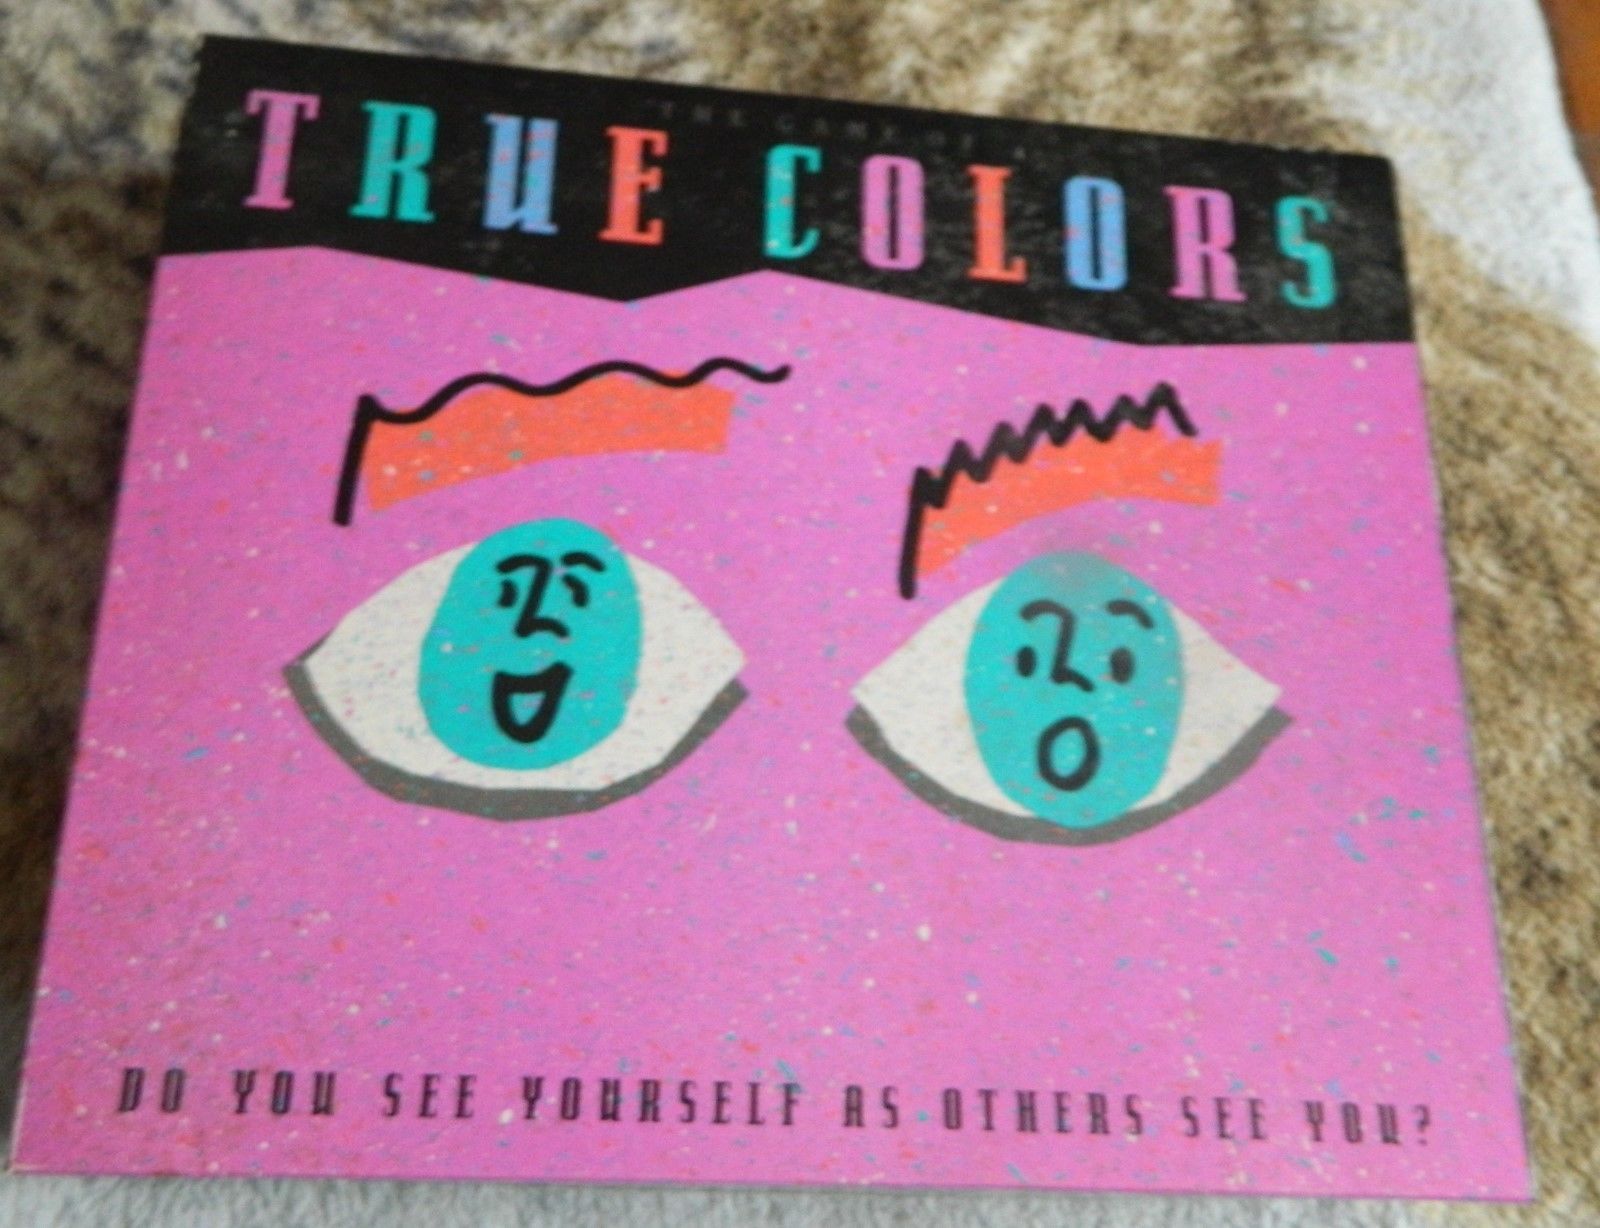 TRUE COLORS BOARD GAME "DO YOU SEE YOURSELF AS OTHERS SEE YOU?" - $18.00